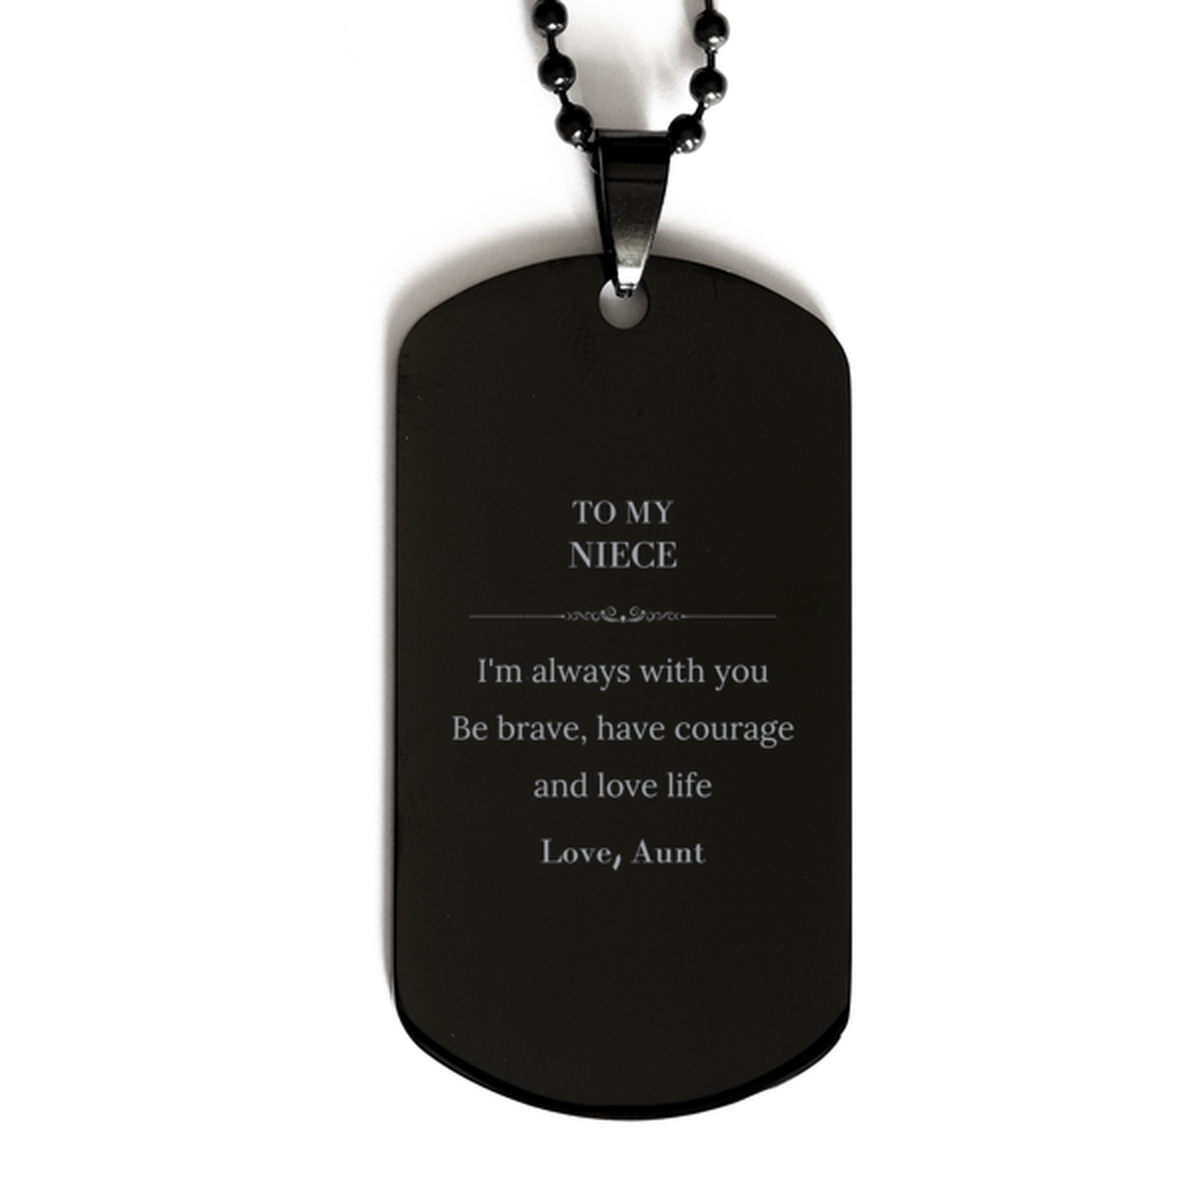 To My Niece Gifts from Aunt, Unique Black Dog Tag Inspirational Christmas Birthday Graduation Gifts for Niece I'm always with you. Be brave, have courage and love life. Love, Aunt